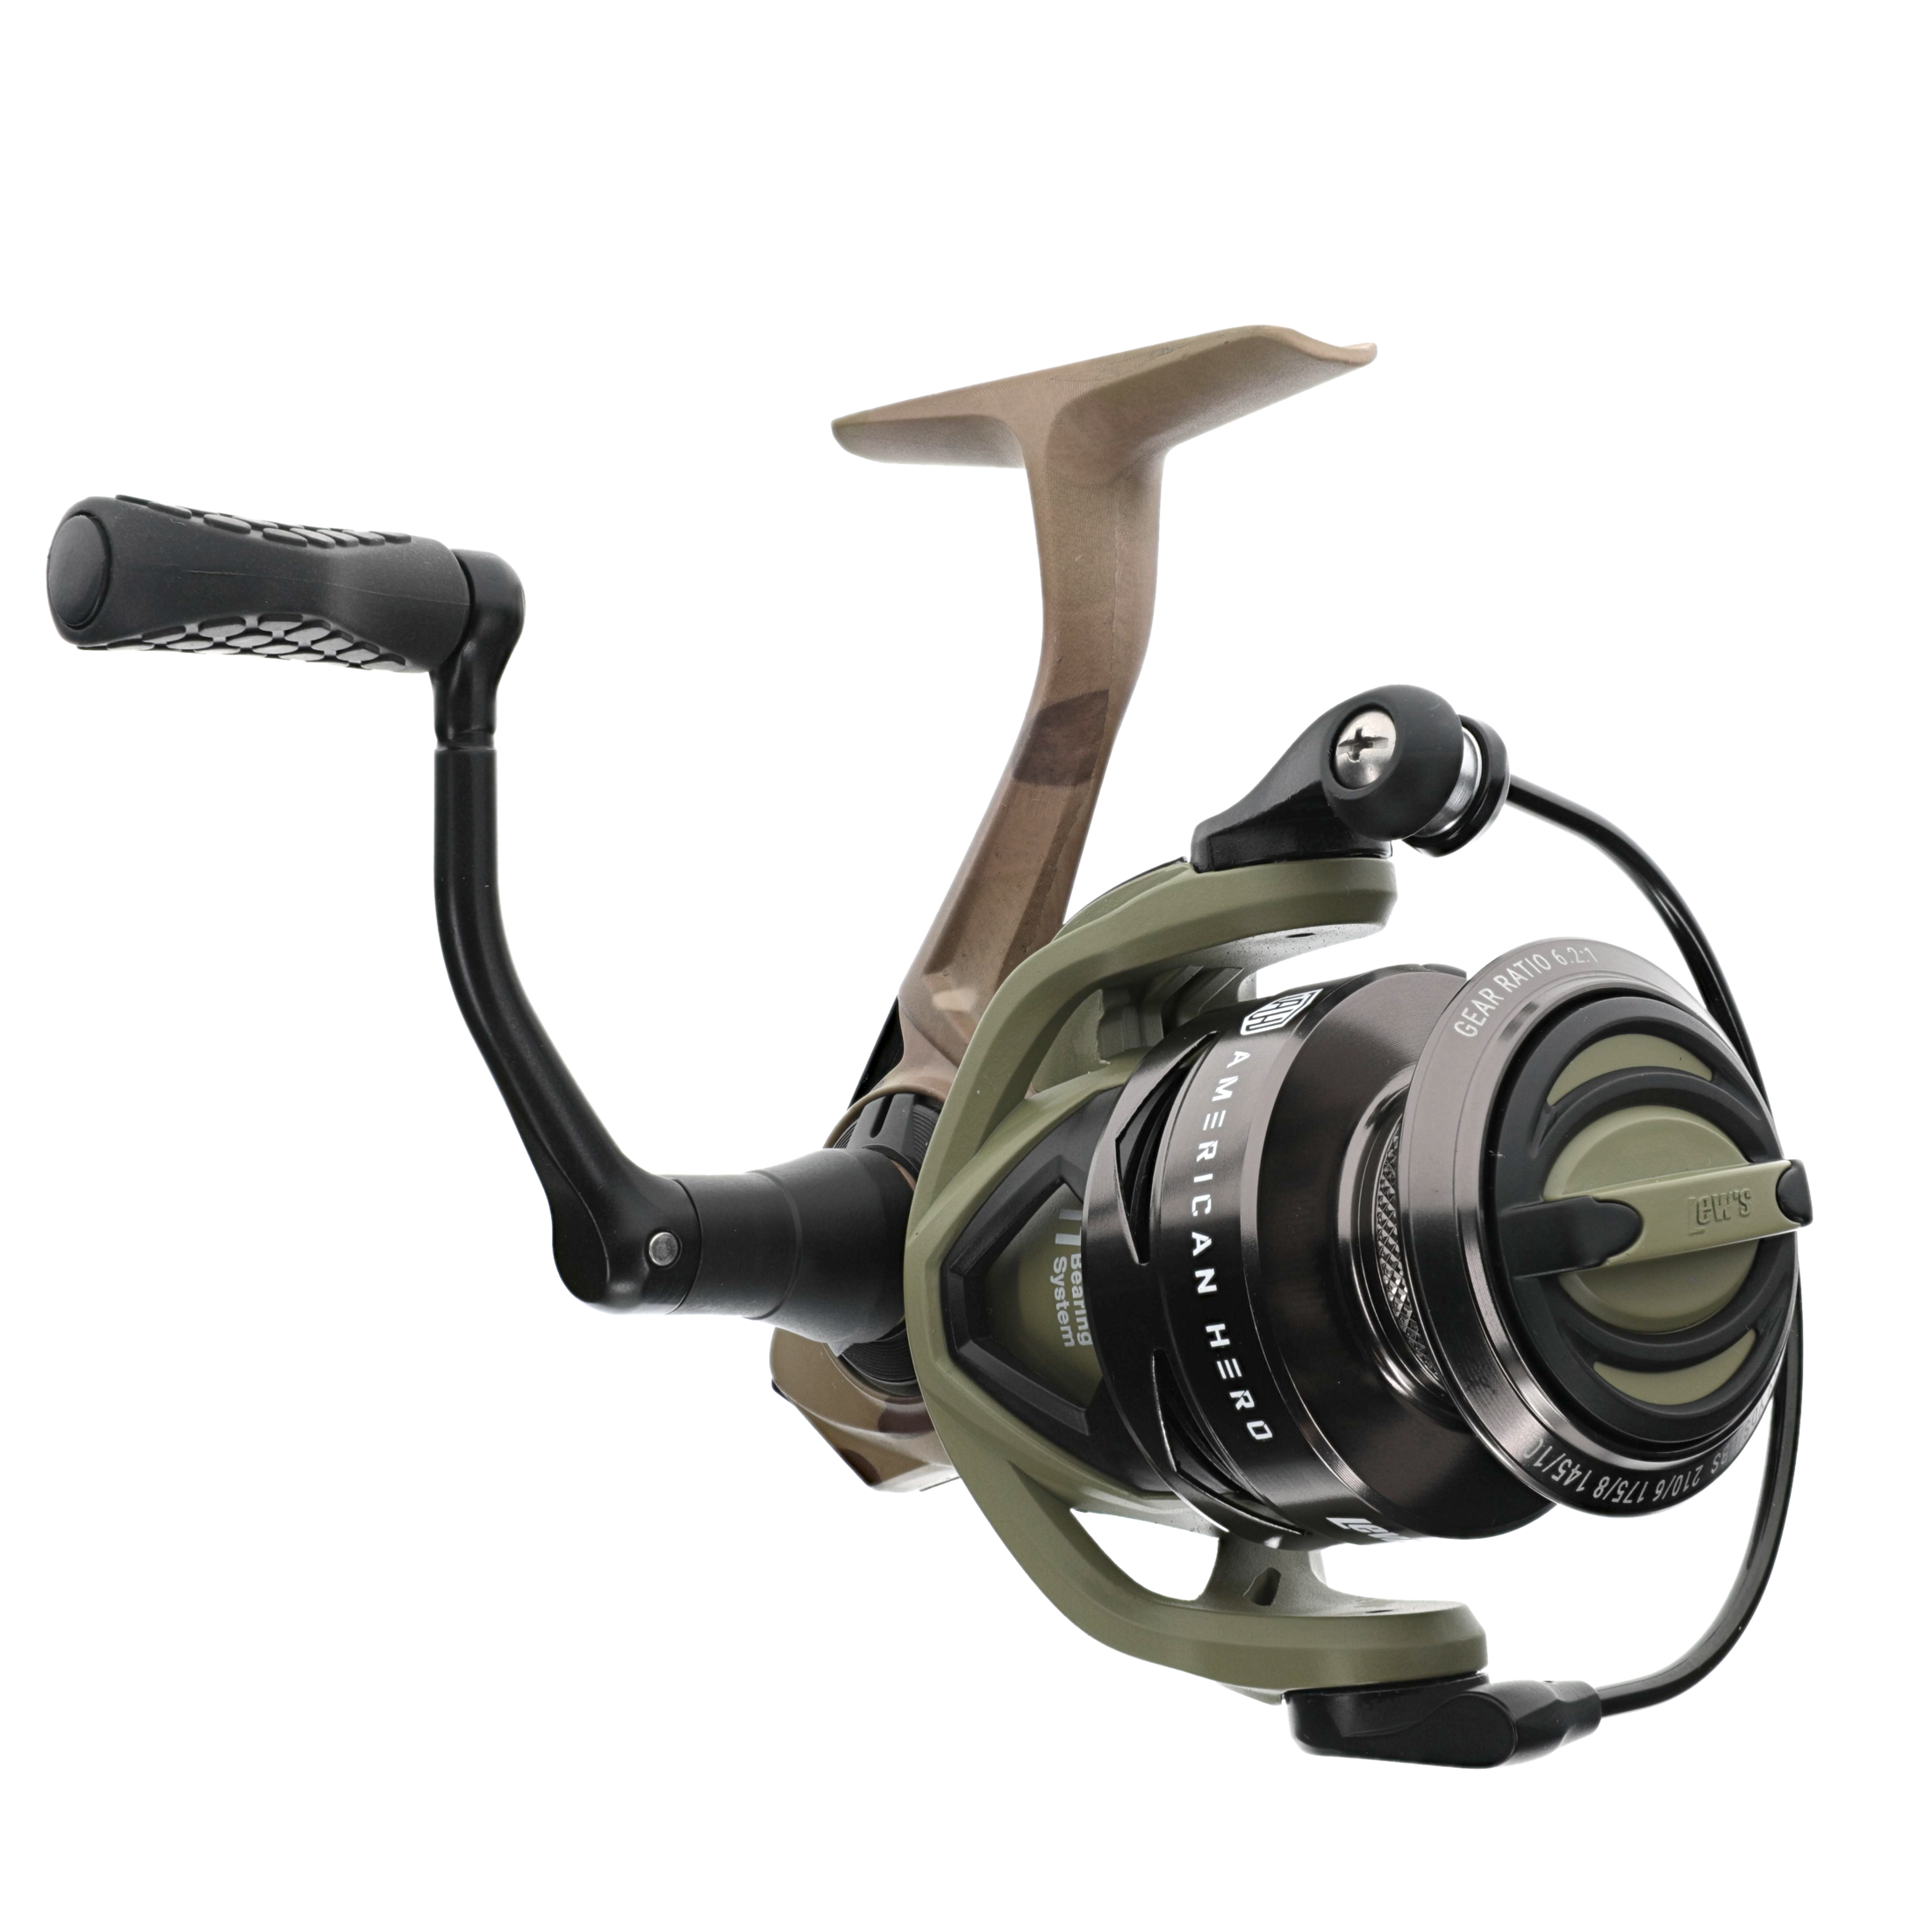 Lew's American Hero Tier 1 Spinning Reel, 10+1 Stainless Steel Ball  Bearings, Size 200, 6.2:1 Gear Ratio, Right or Left-Hand Retrieve, Multicam